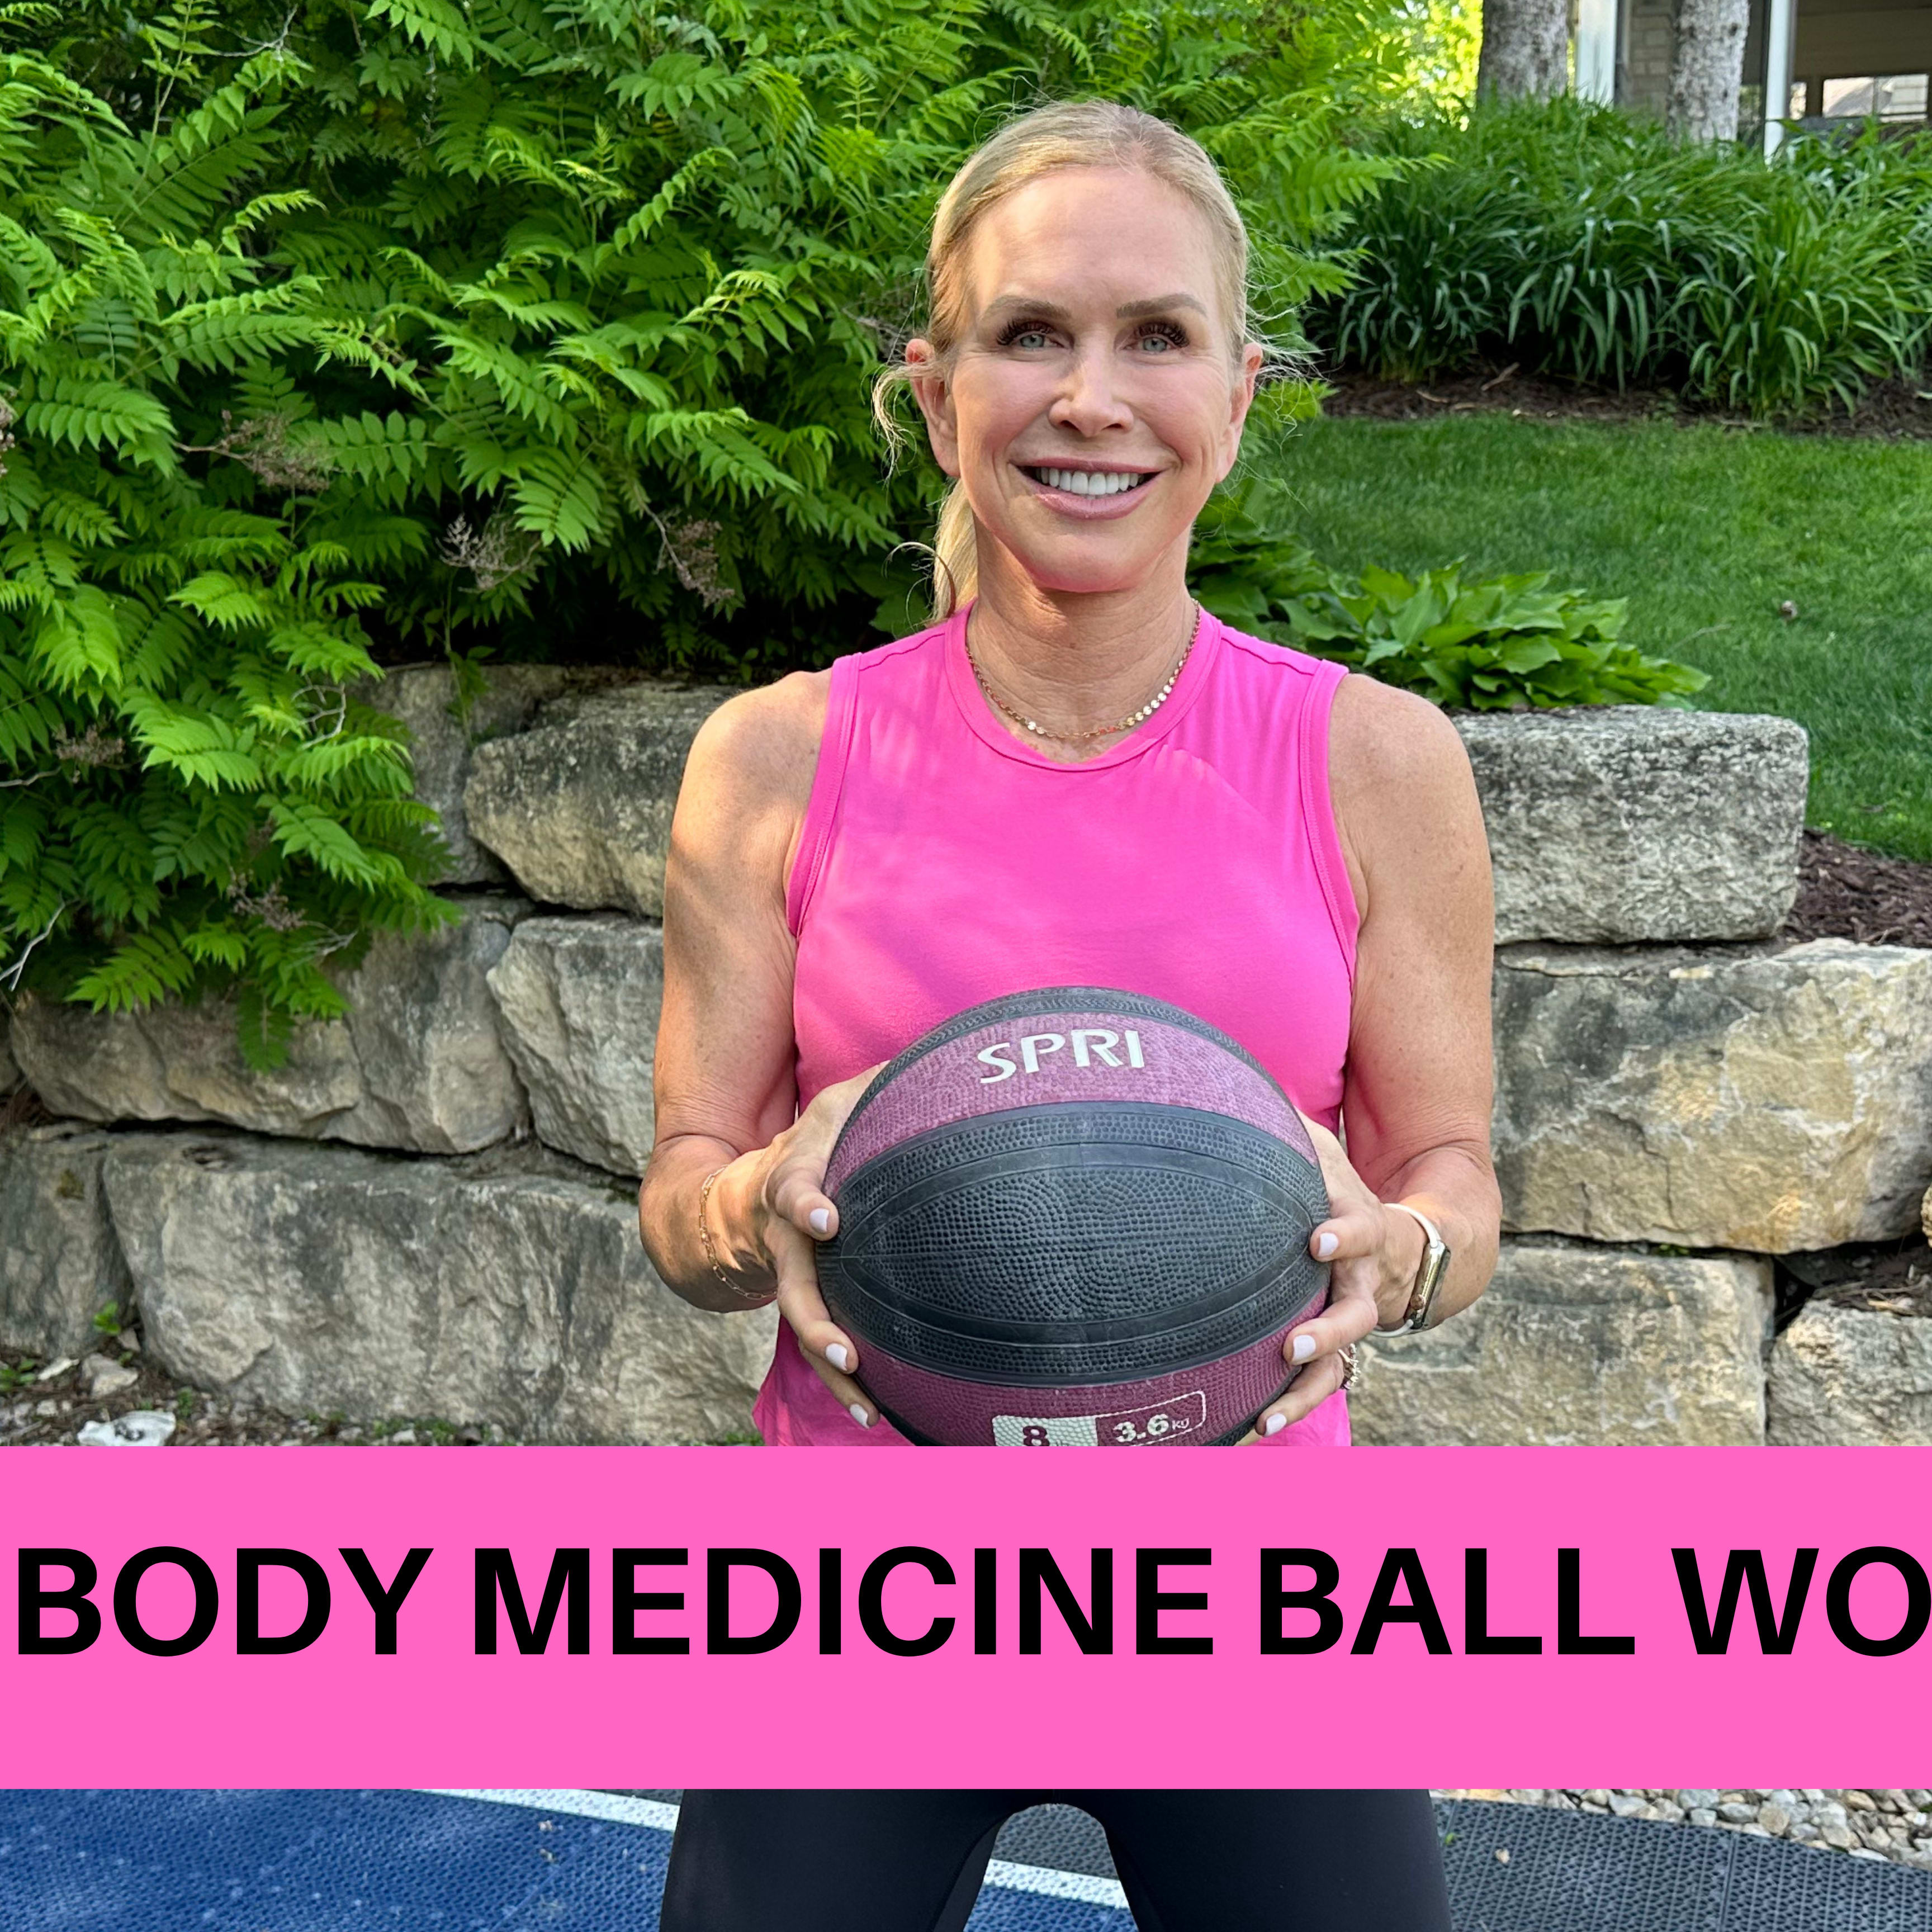 23 Best Medicine Ball Exercises For A Full-Body Workout, From A Trainer